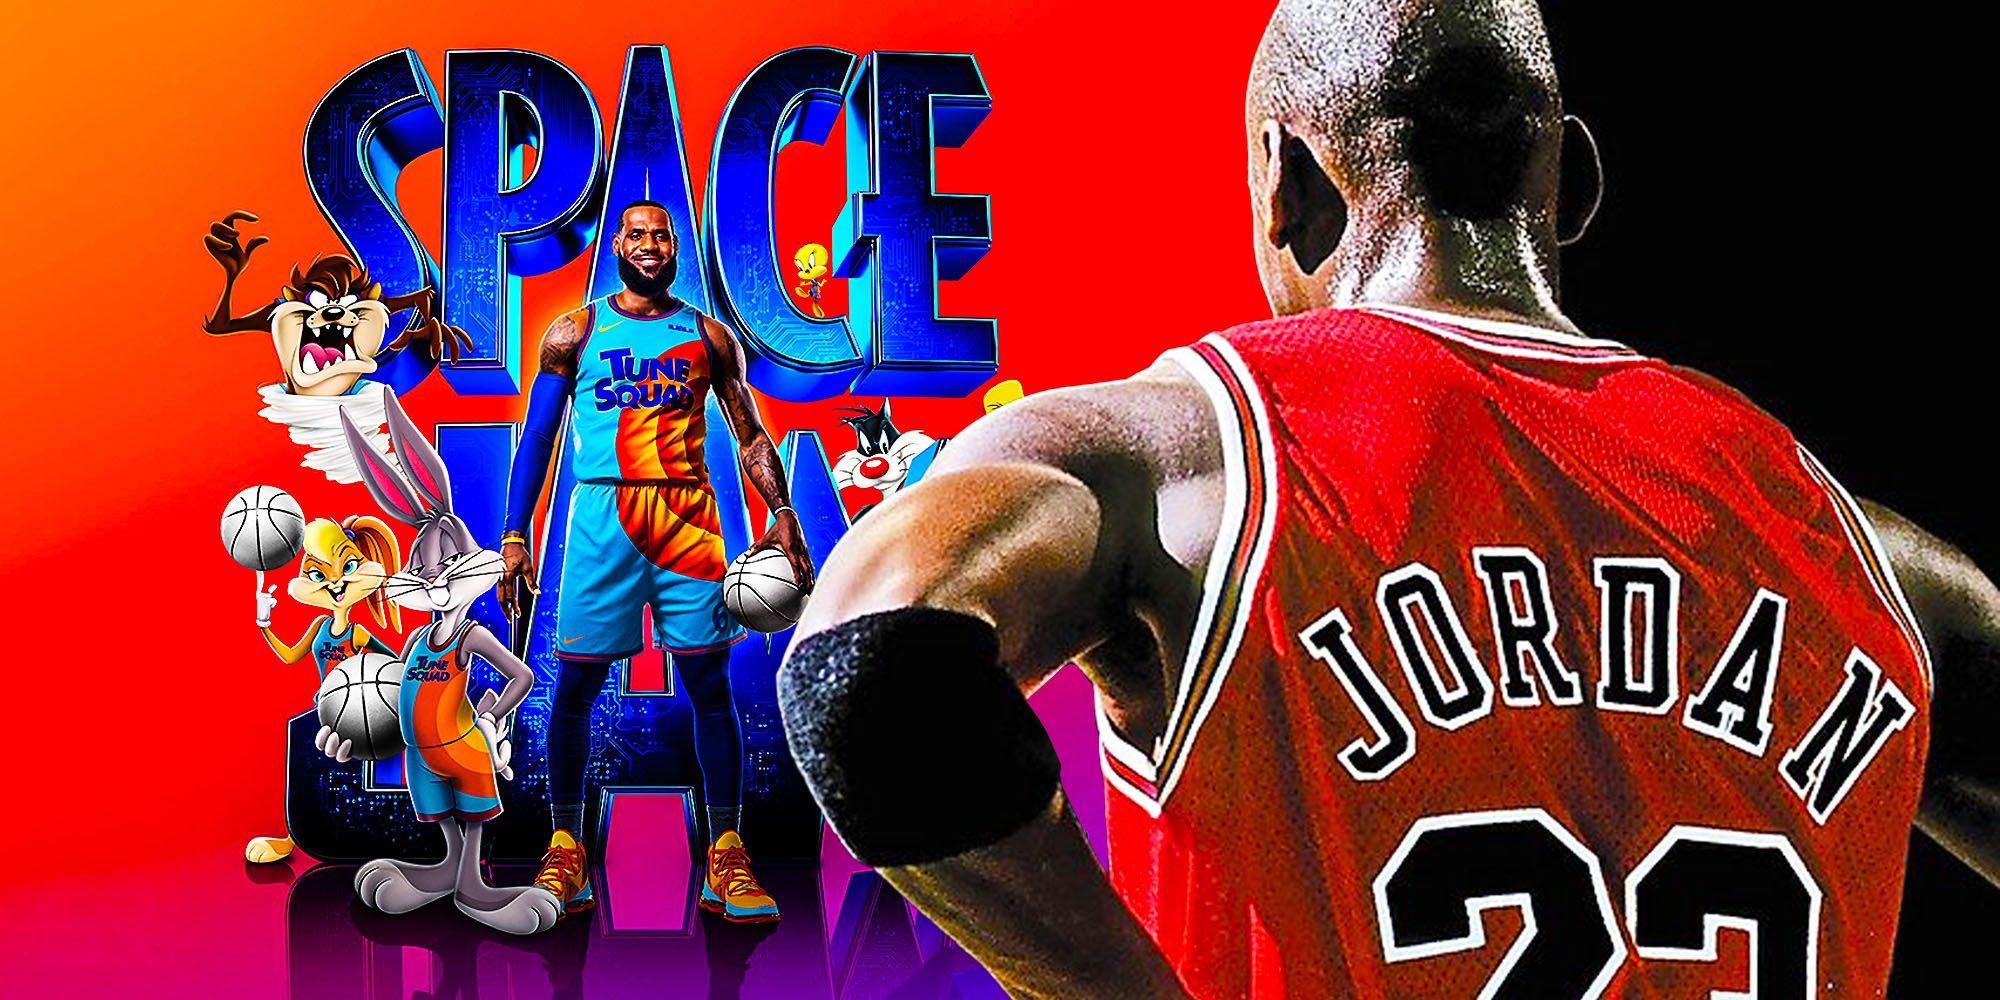 The jersey basketball Tune Squad worn by Michael Jordan in Space